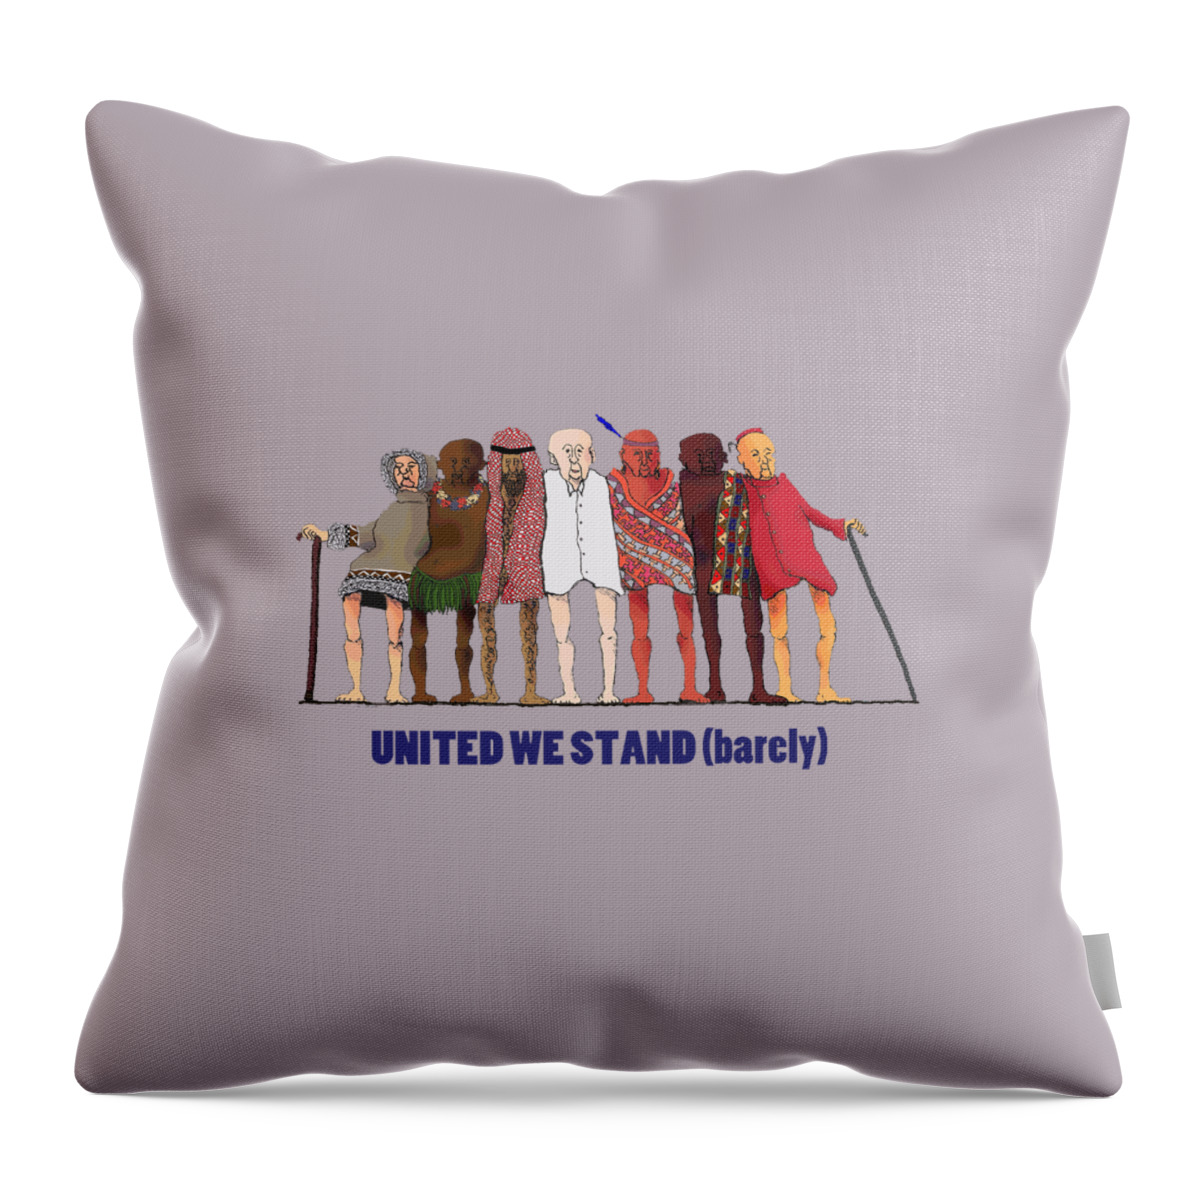  Throw Pillow featuring the digital art United We Stand #1 by R Allen Swezey